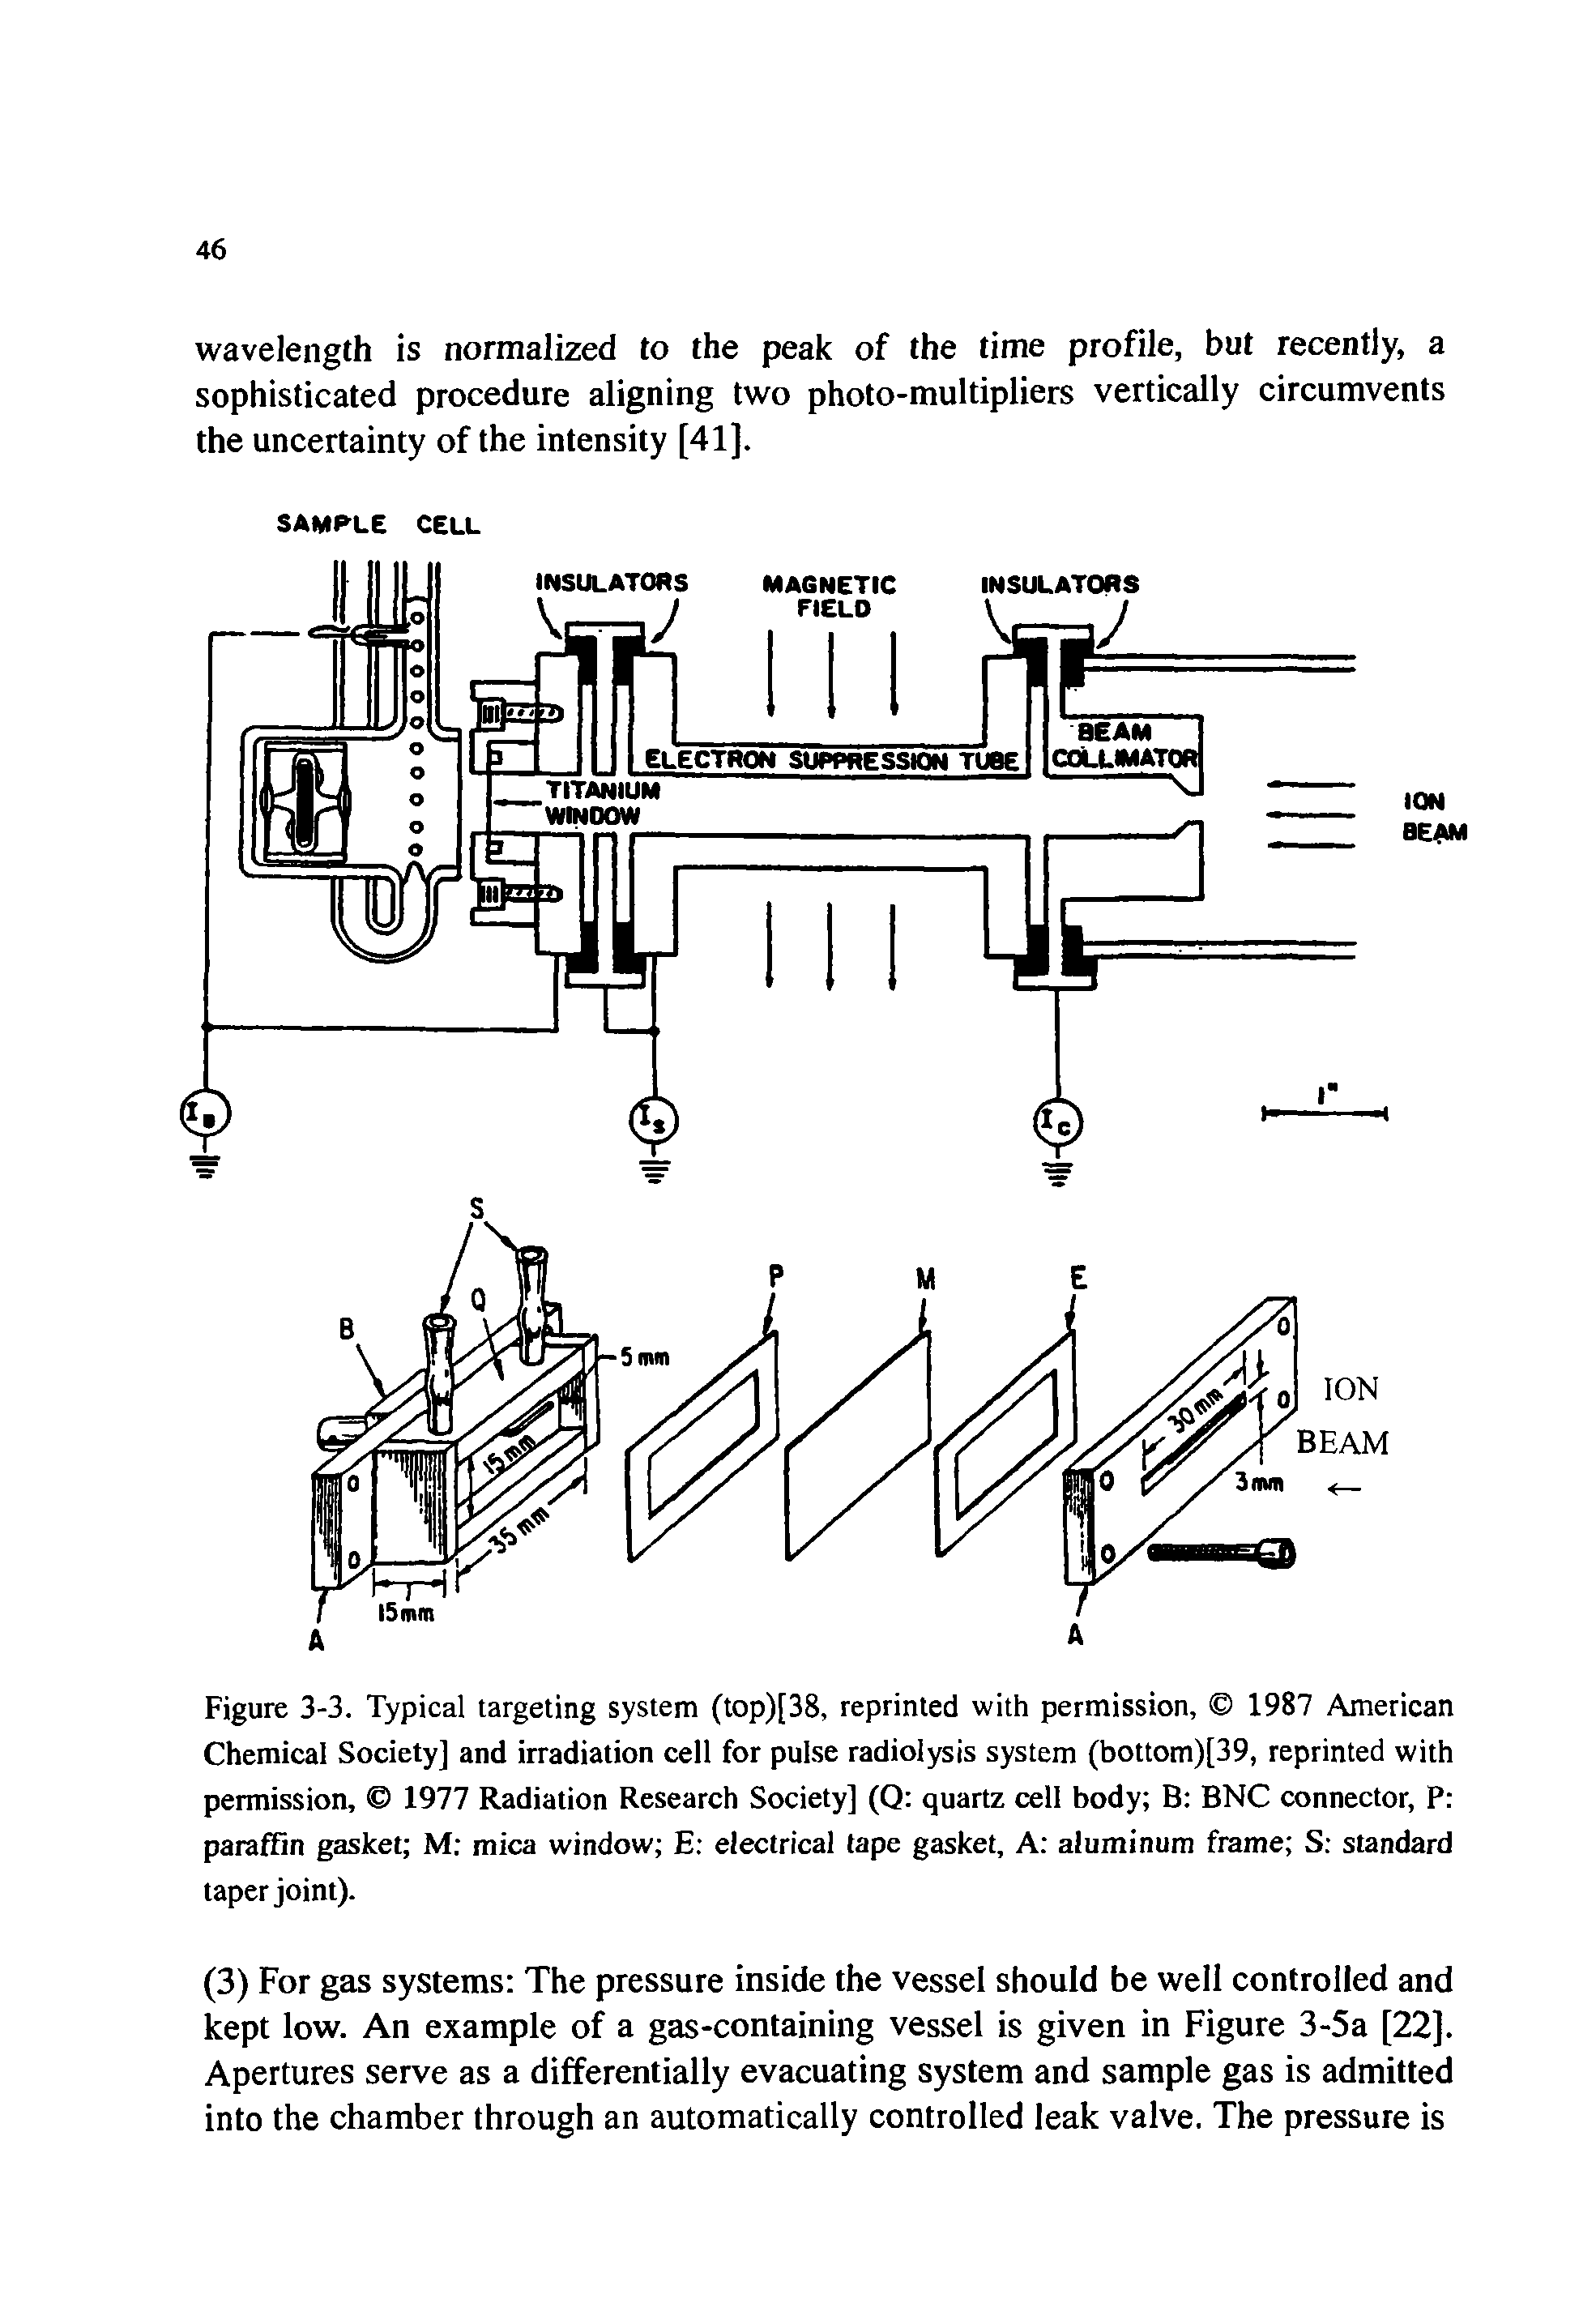 Figure 3-3. Typical targeting system (top)[38, reprinted with permission, 1987 American Chemical Society] and irradiation cell for pulse radiolysis system (bottom)[39, reprinted with permission, 1977 Radiation Research Society] (Q quartz cell body B BNC connector, P paraffin gasket M mica window E electrical tape gasket. A aluminum frame S standard taper joint).